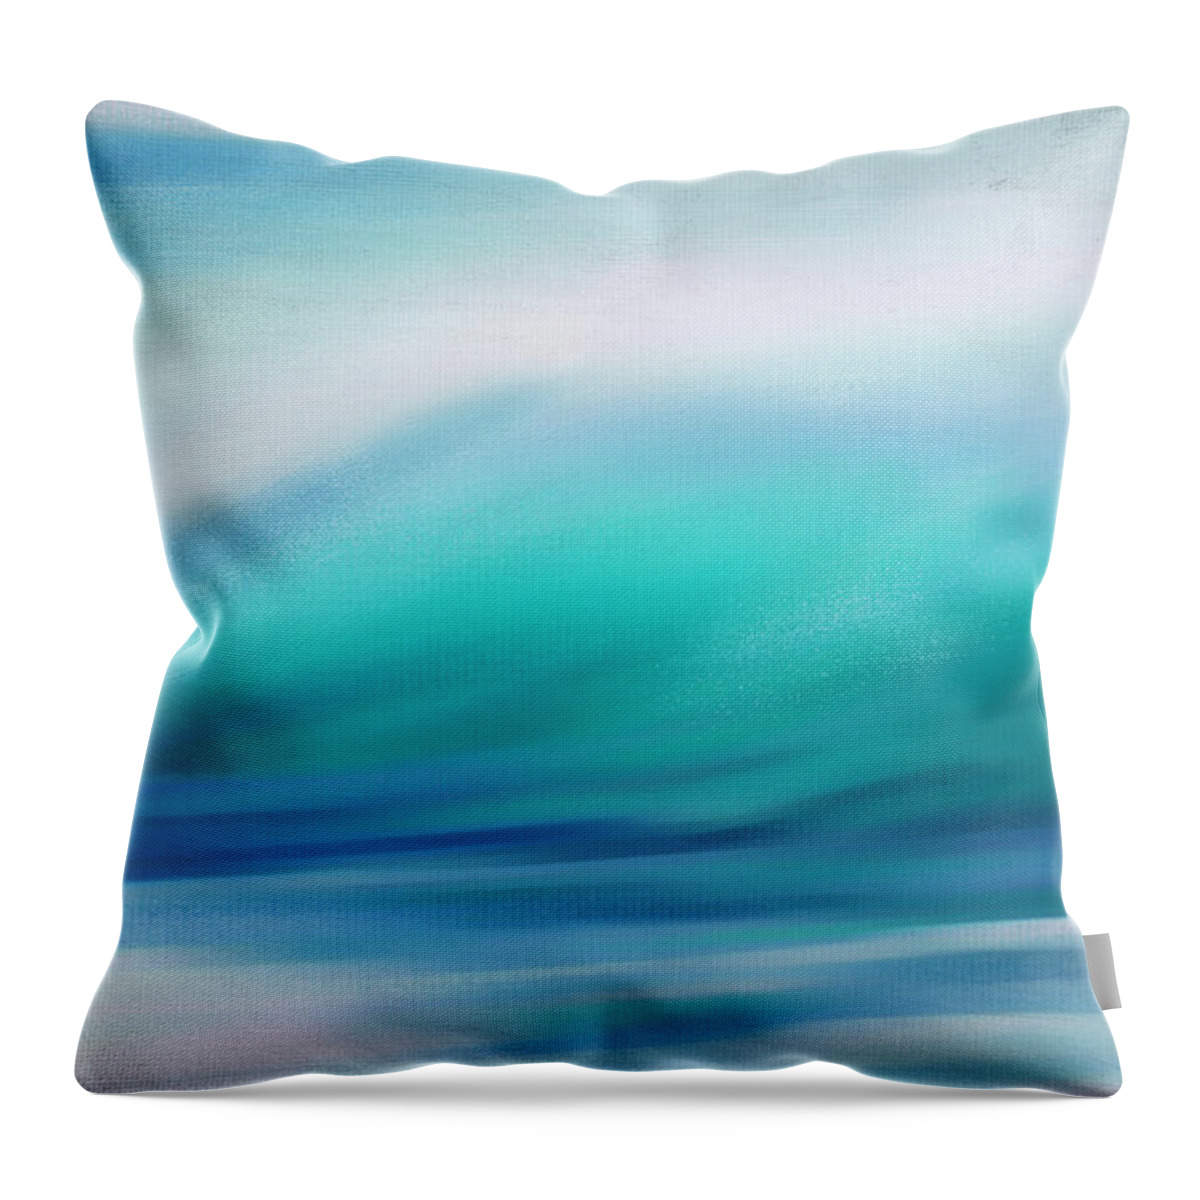 Seascapes Abstract Throw Pillow featuring the digital art Waves by Lourry Legarde